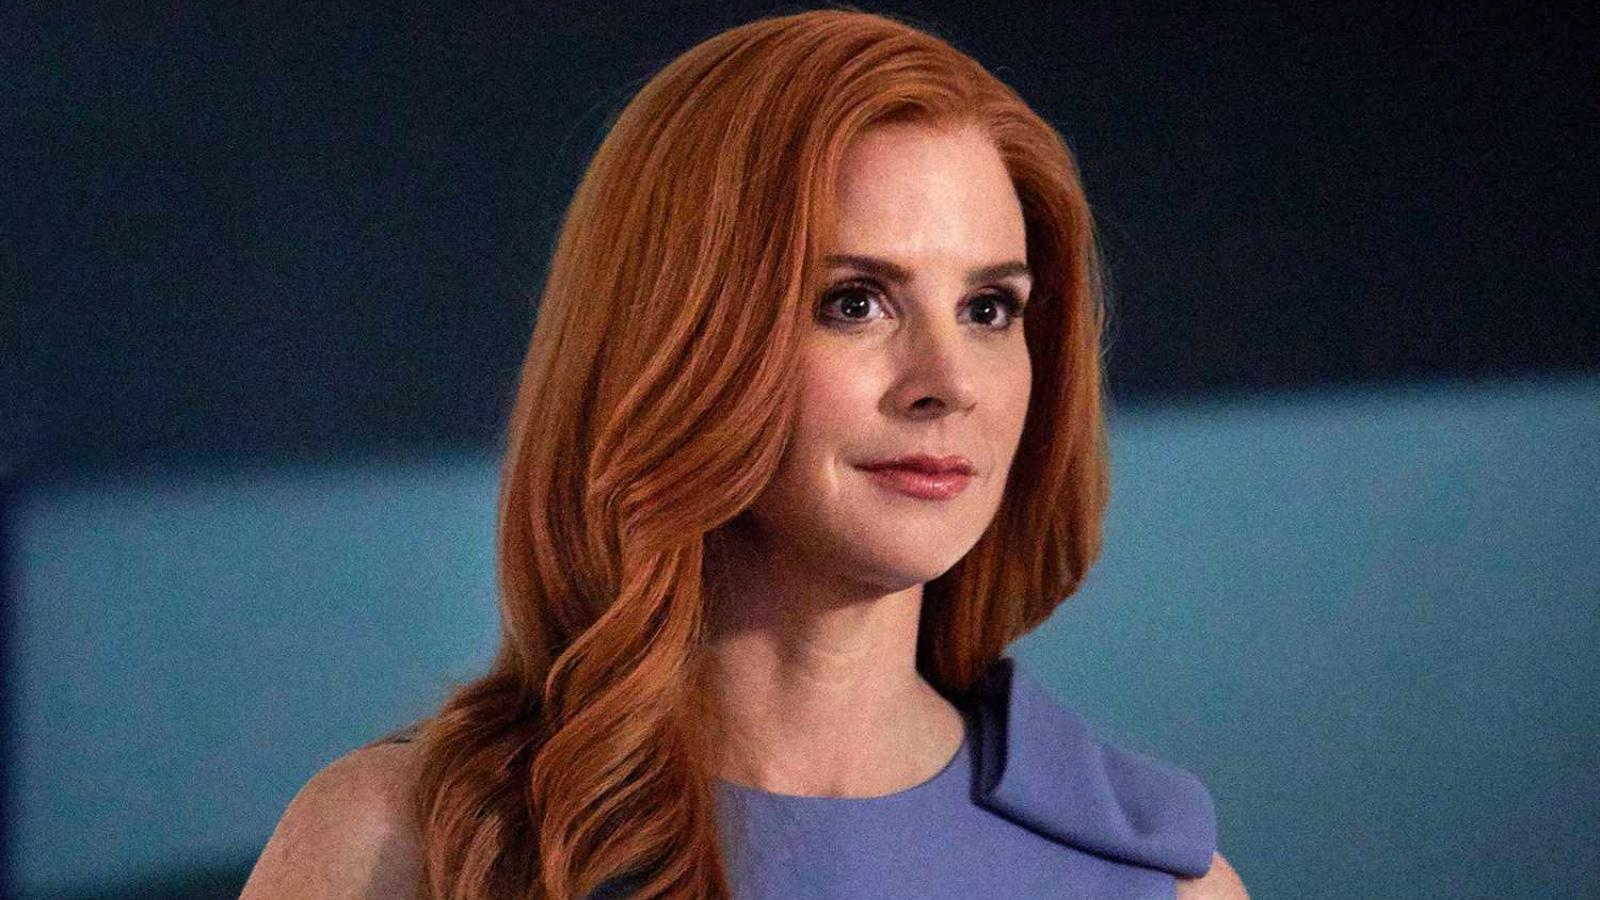 Sarah Rafferty in Suits as Donna